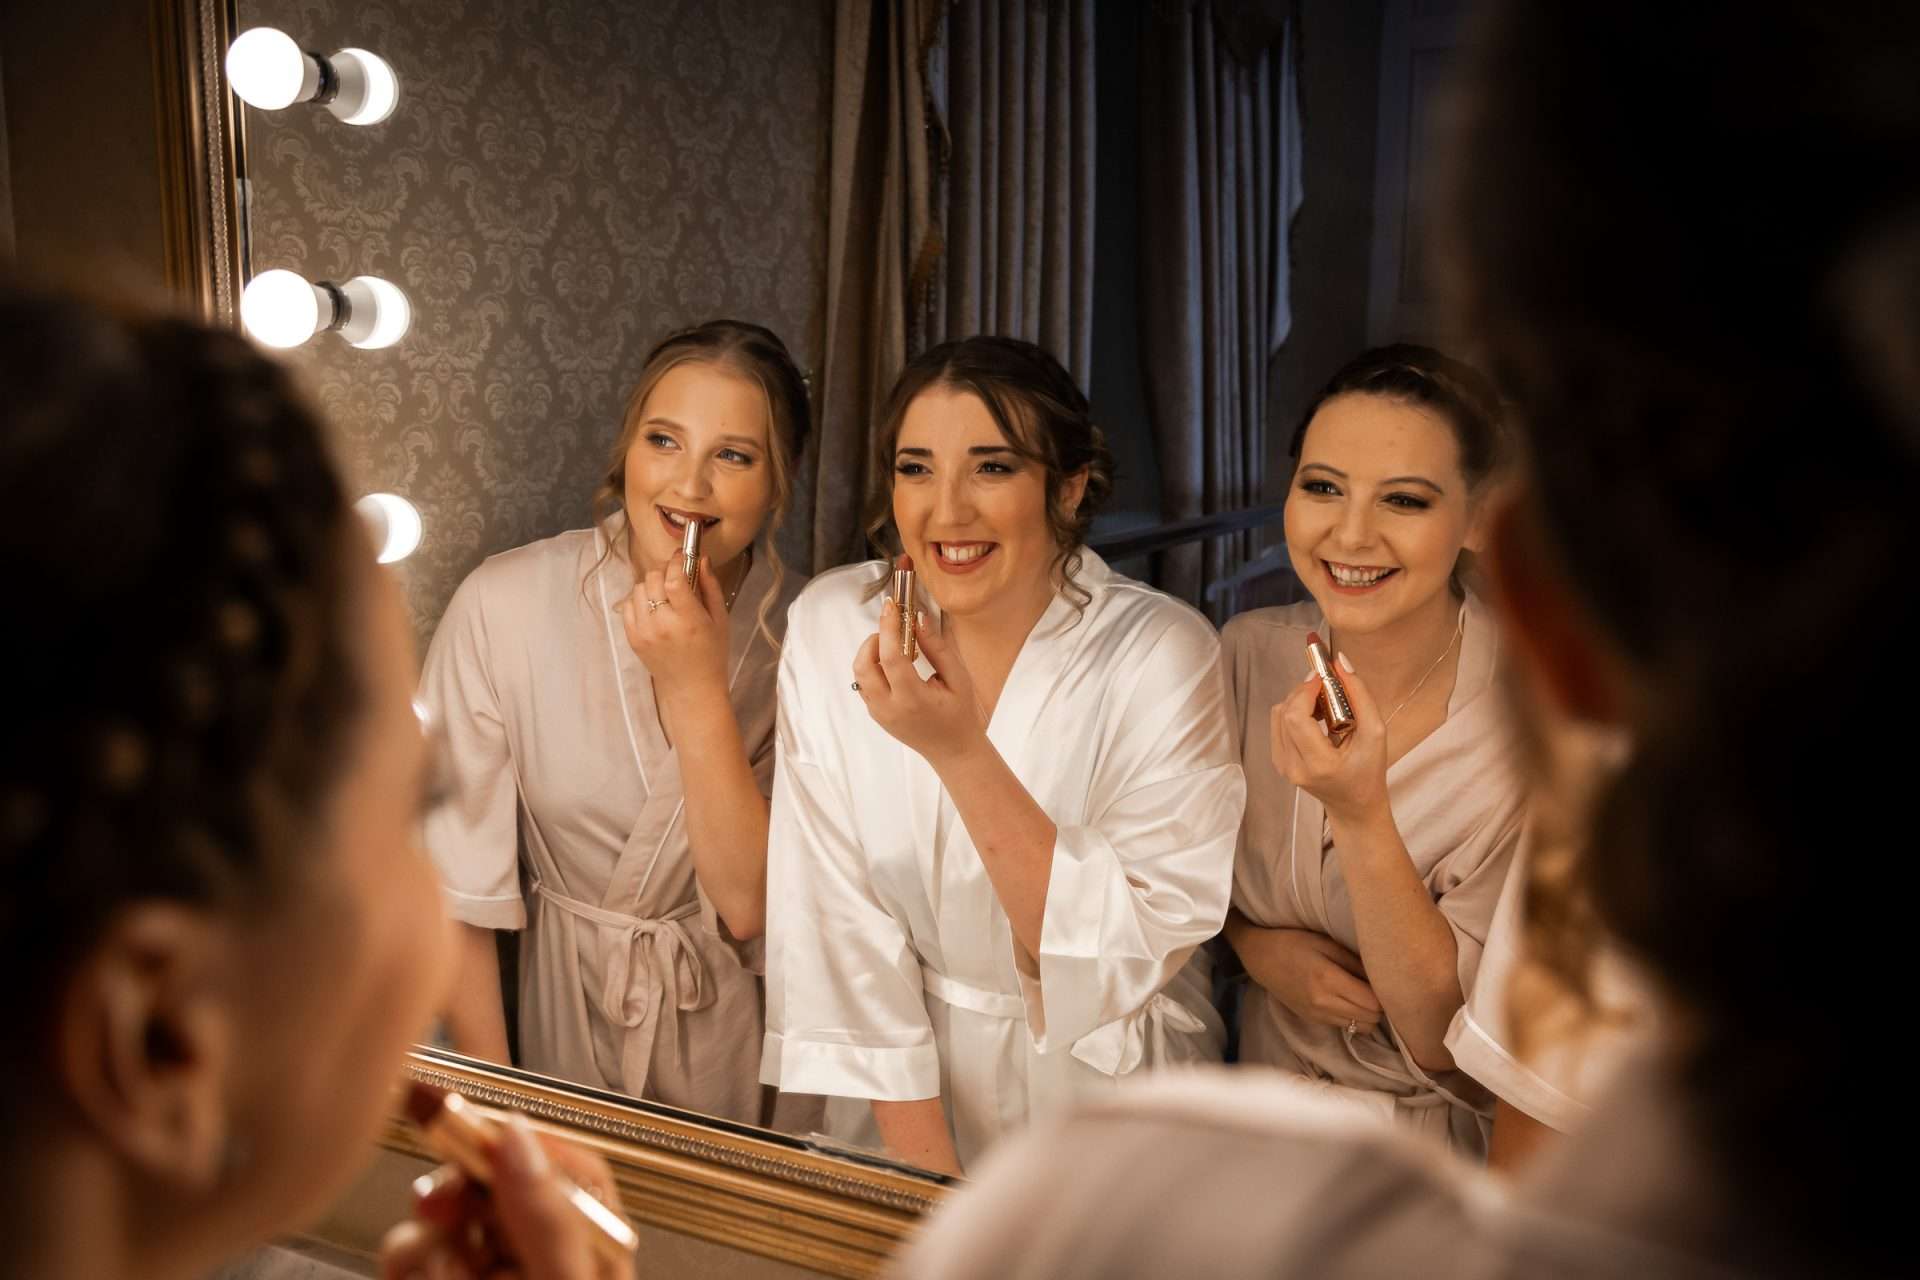 The bride and her bridesmaids applying lipstick in the mirrow during the bridal prep morning - Isabelle B Photography 